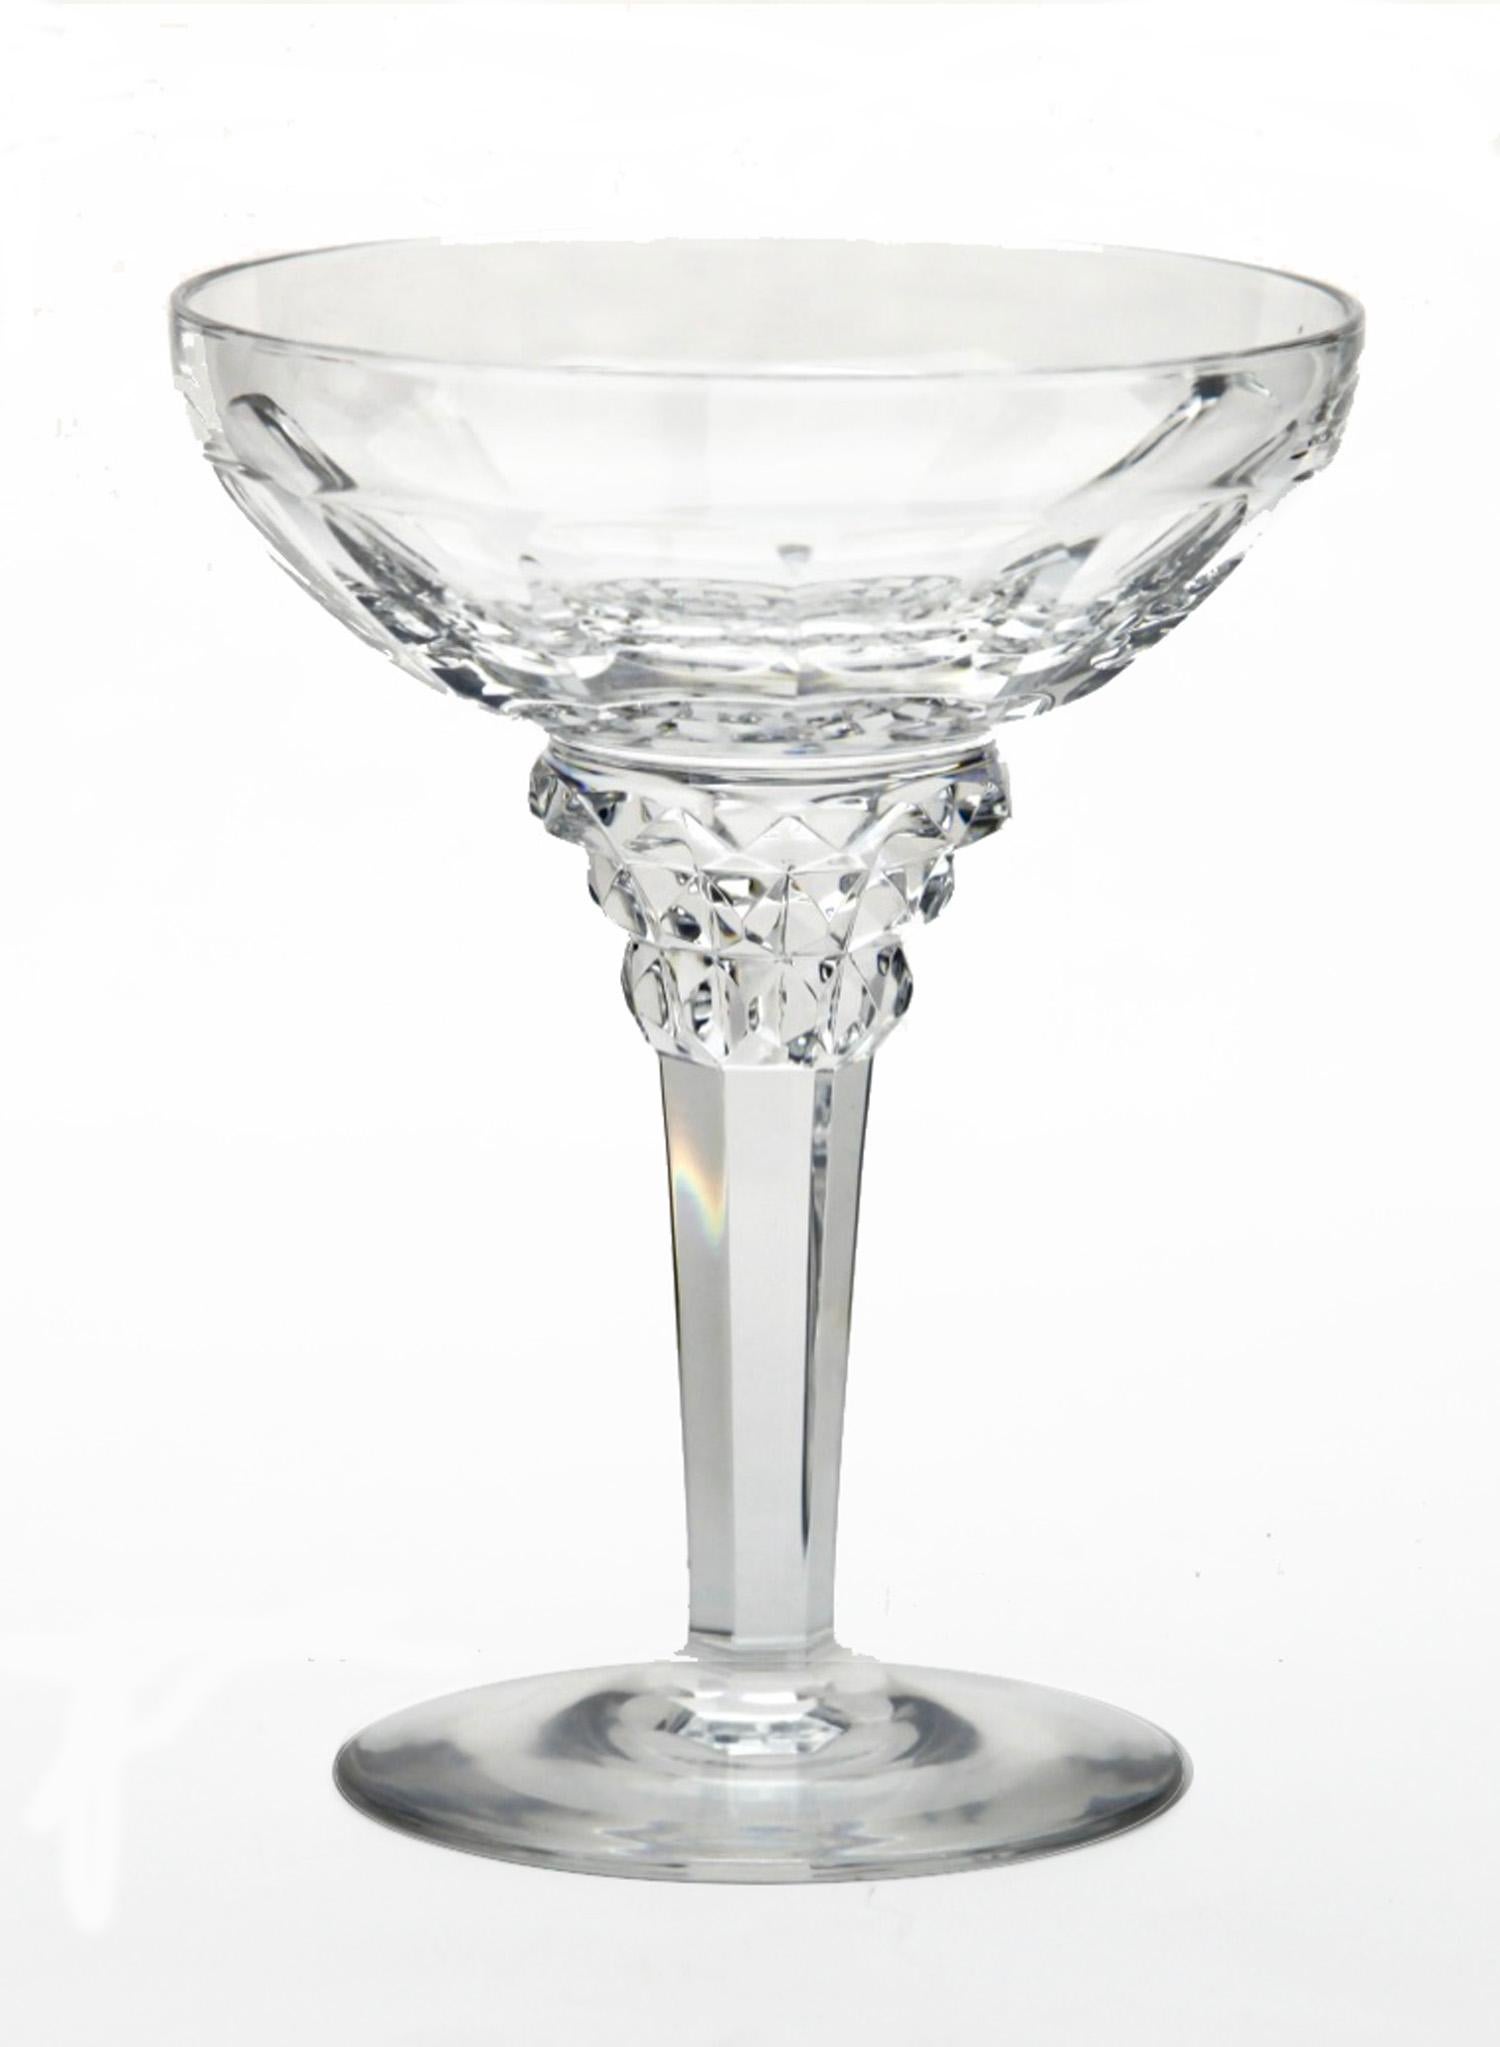 This beautiful set of six champagne coupes were designed by Jan Eisenloeffel for Kristalunie Maastricht in 1928 and have since become the most highly treasured examples of Dutch crystal glass from the Art Deco period. Each one is made by master